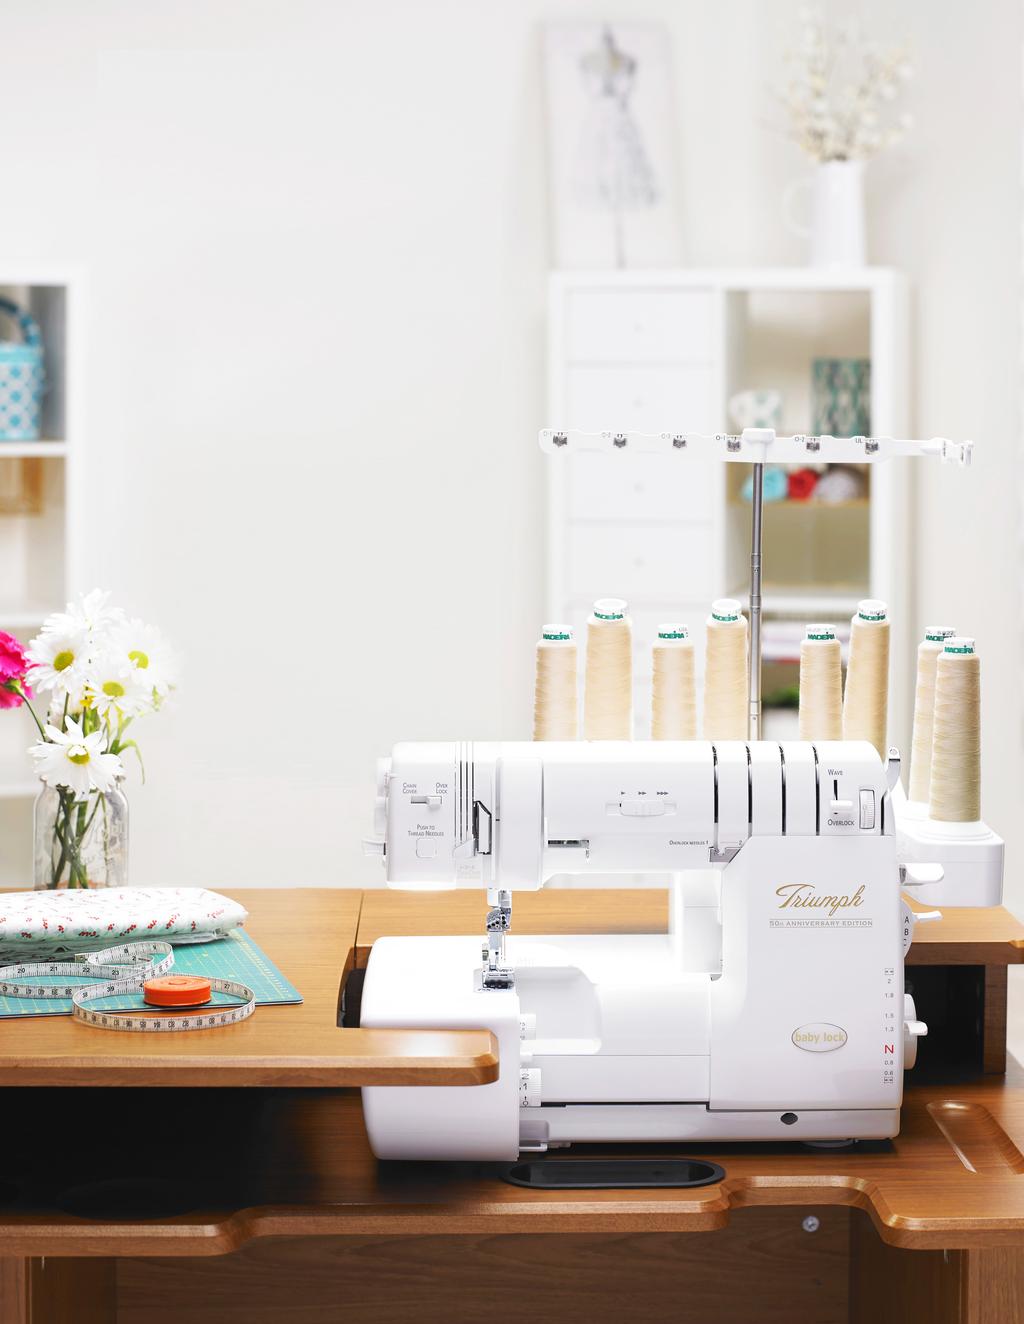 Top of the Line 8-Thread Serger The Triumph conquers serging in a way you never thought possible thanks to RevolutionAir threading.